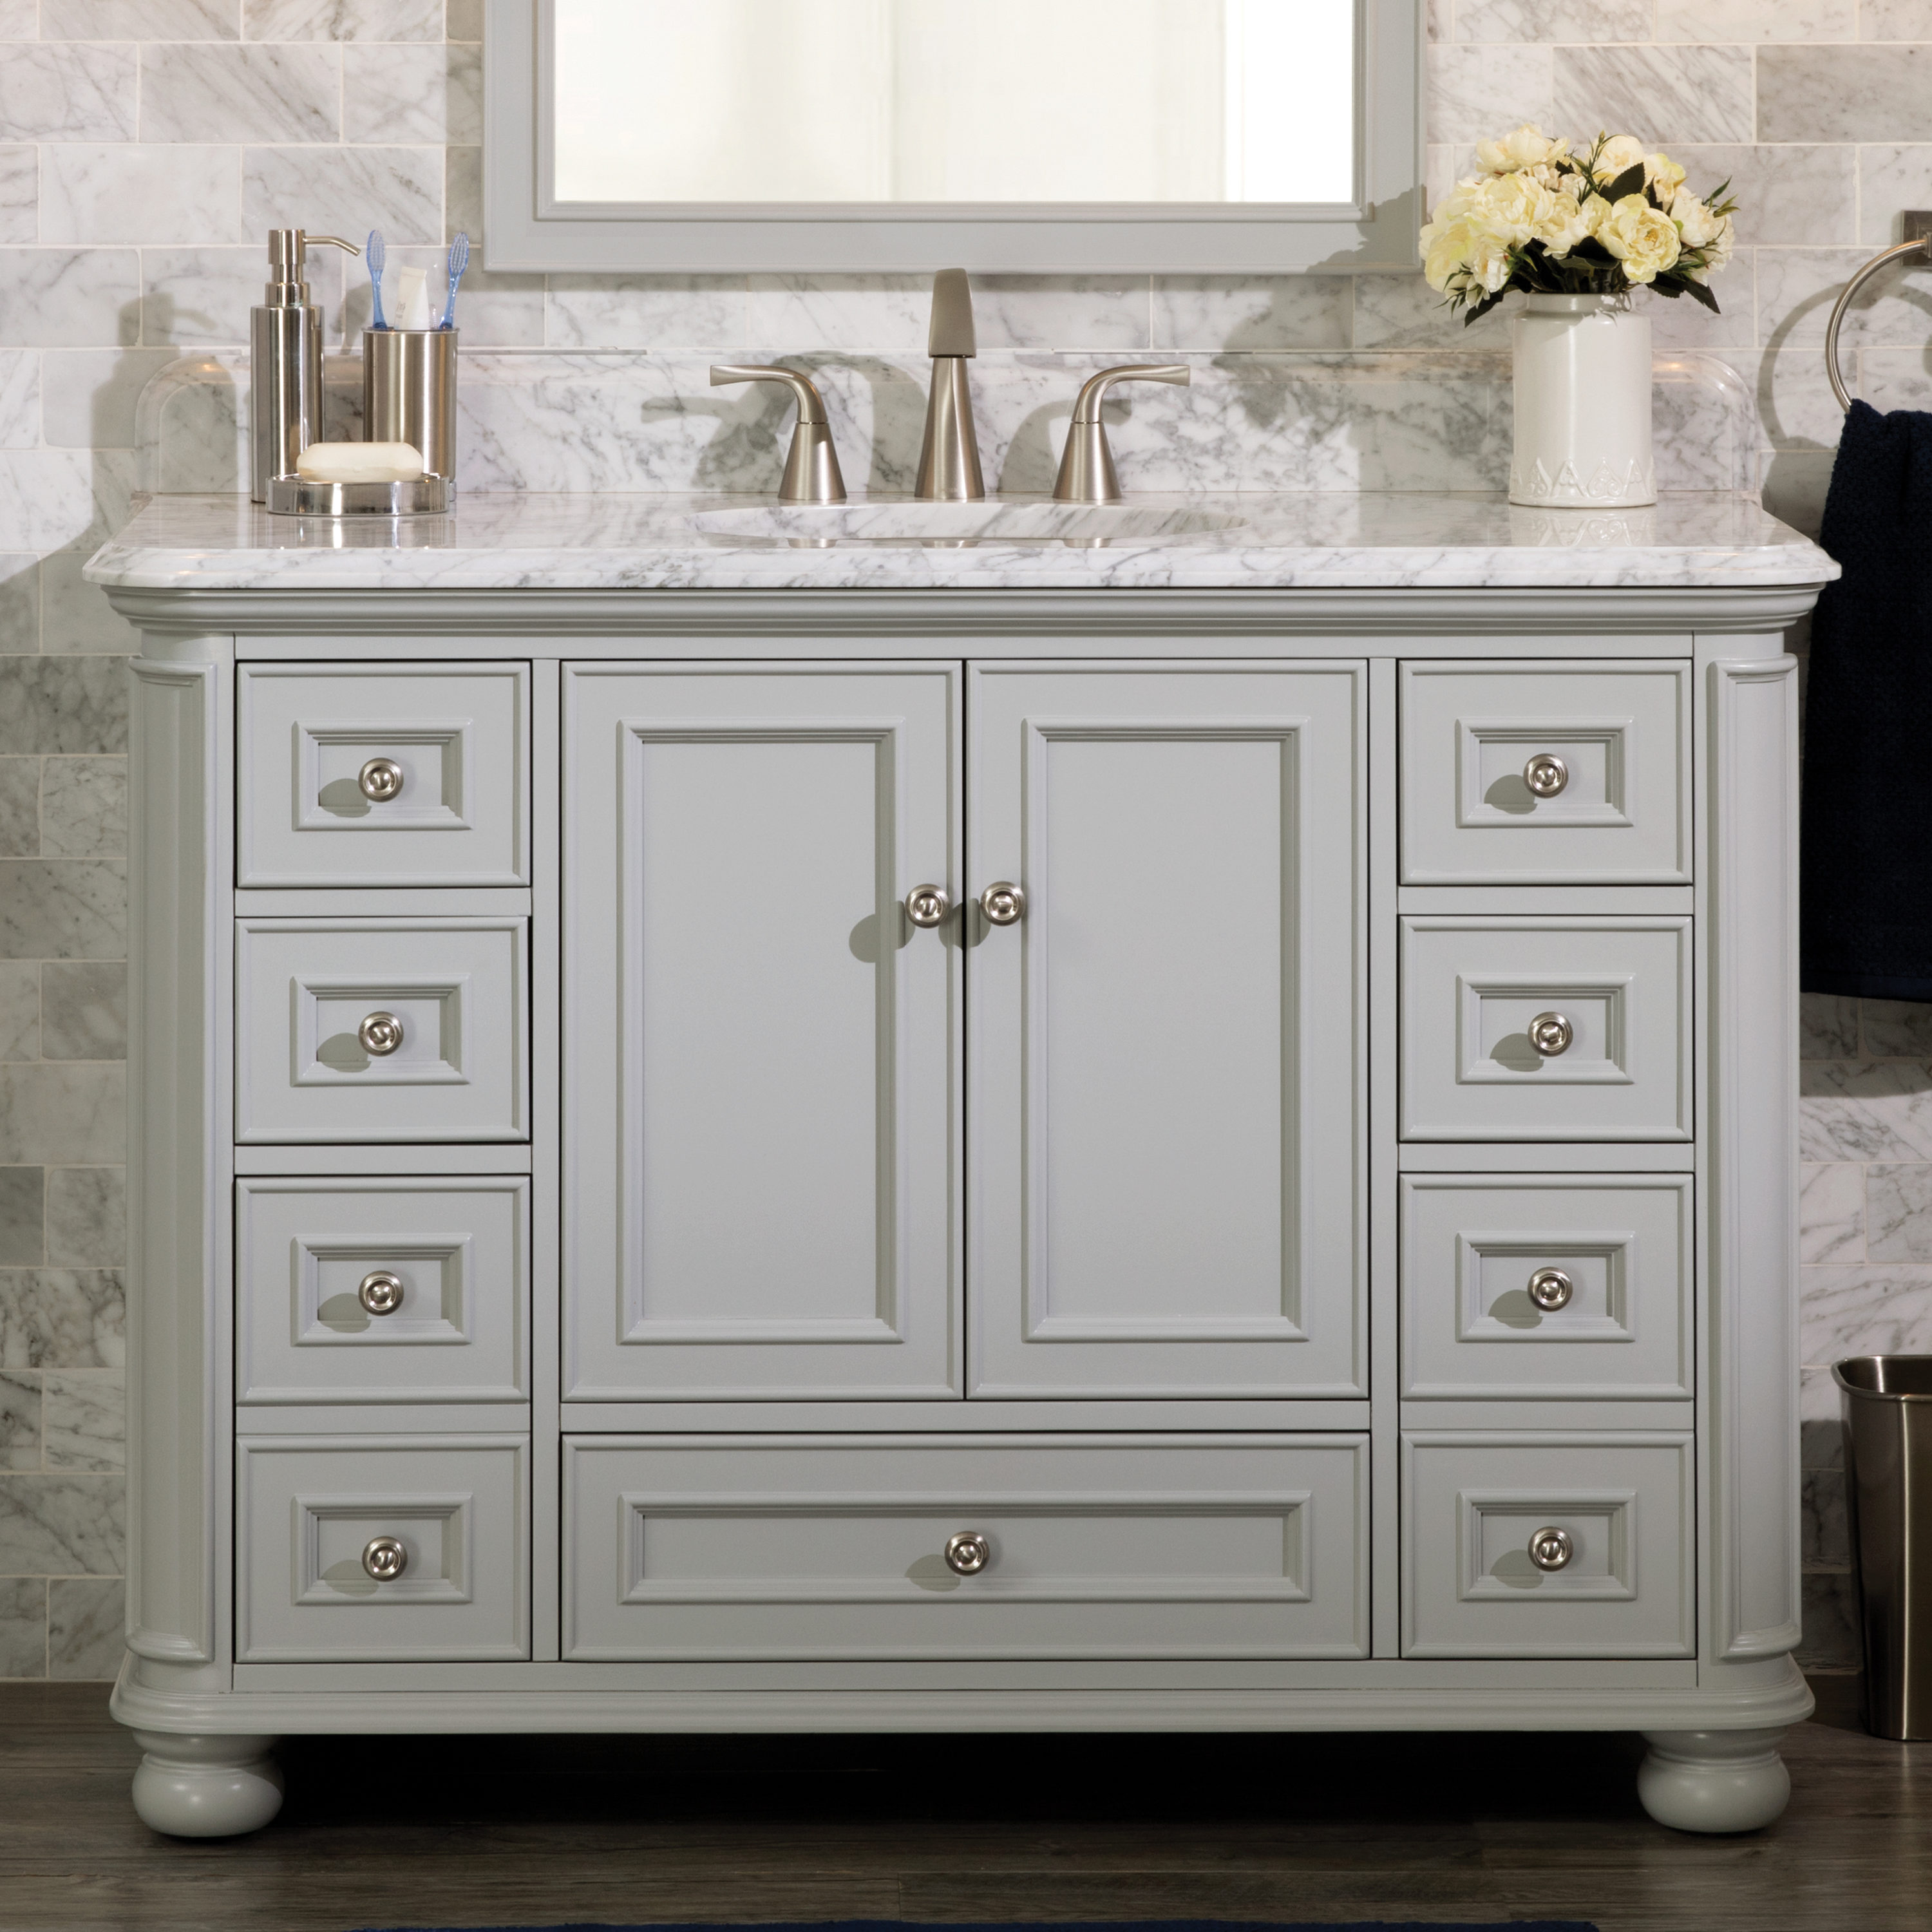 Allen Roth Wrightsville 48 In Light, Bathroom Vanity Tops With Sink 48 Inches